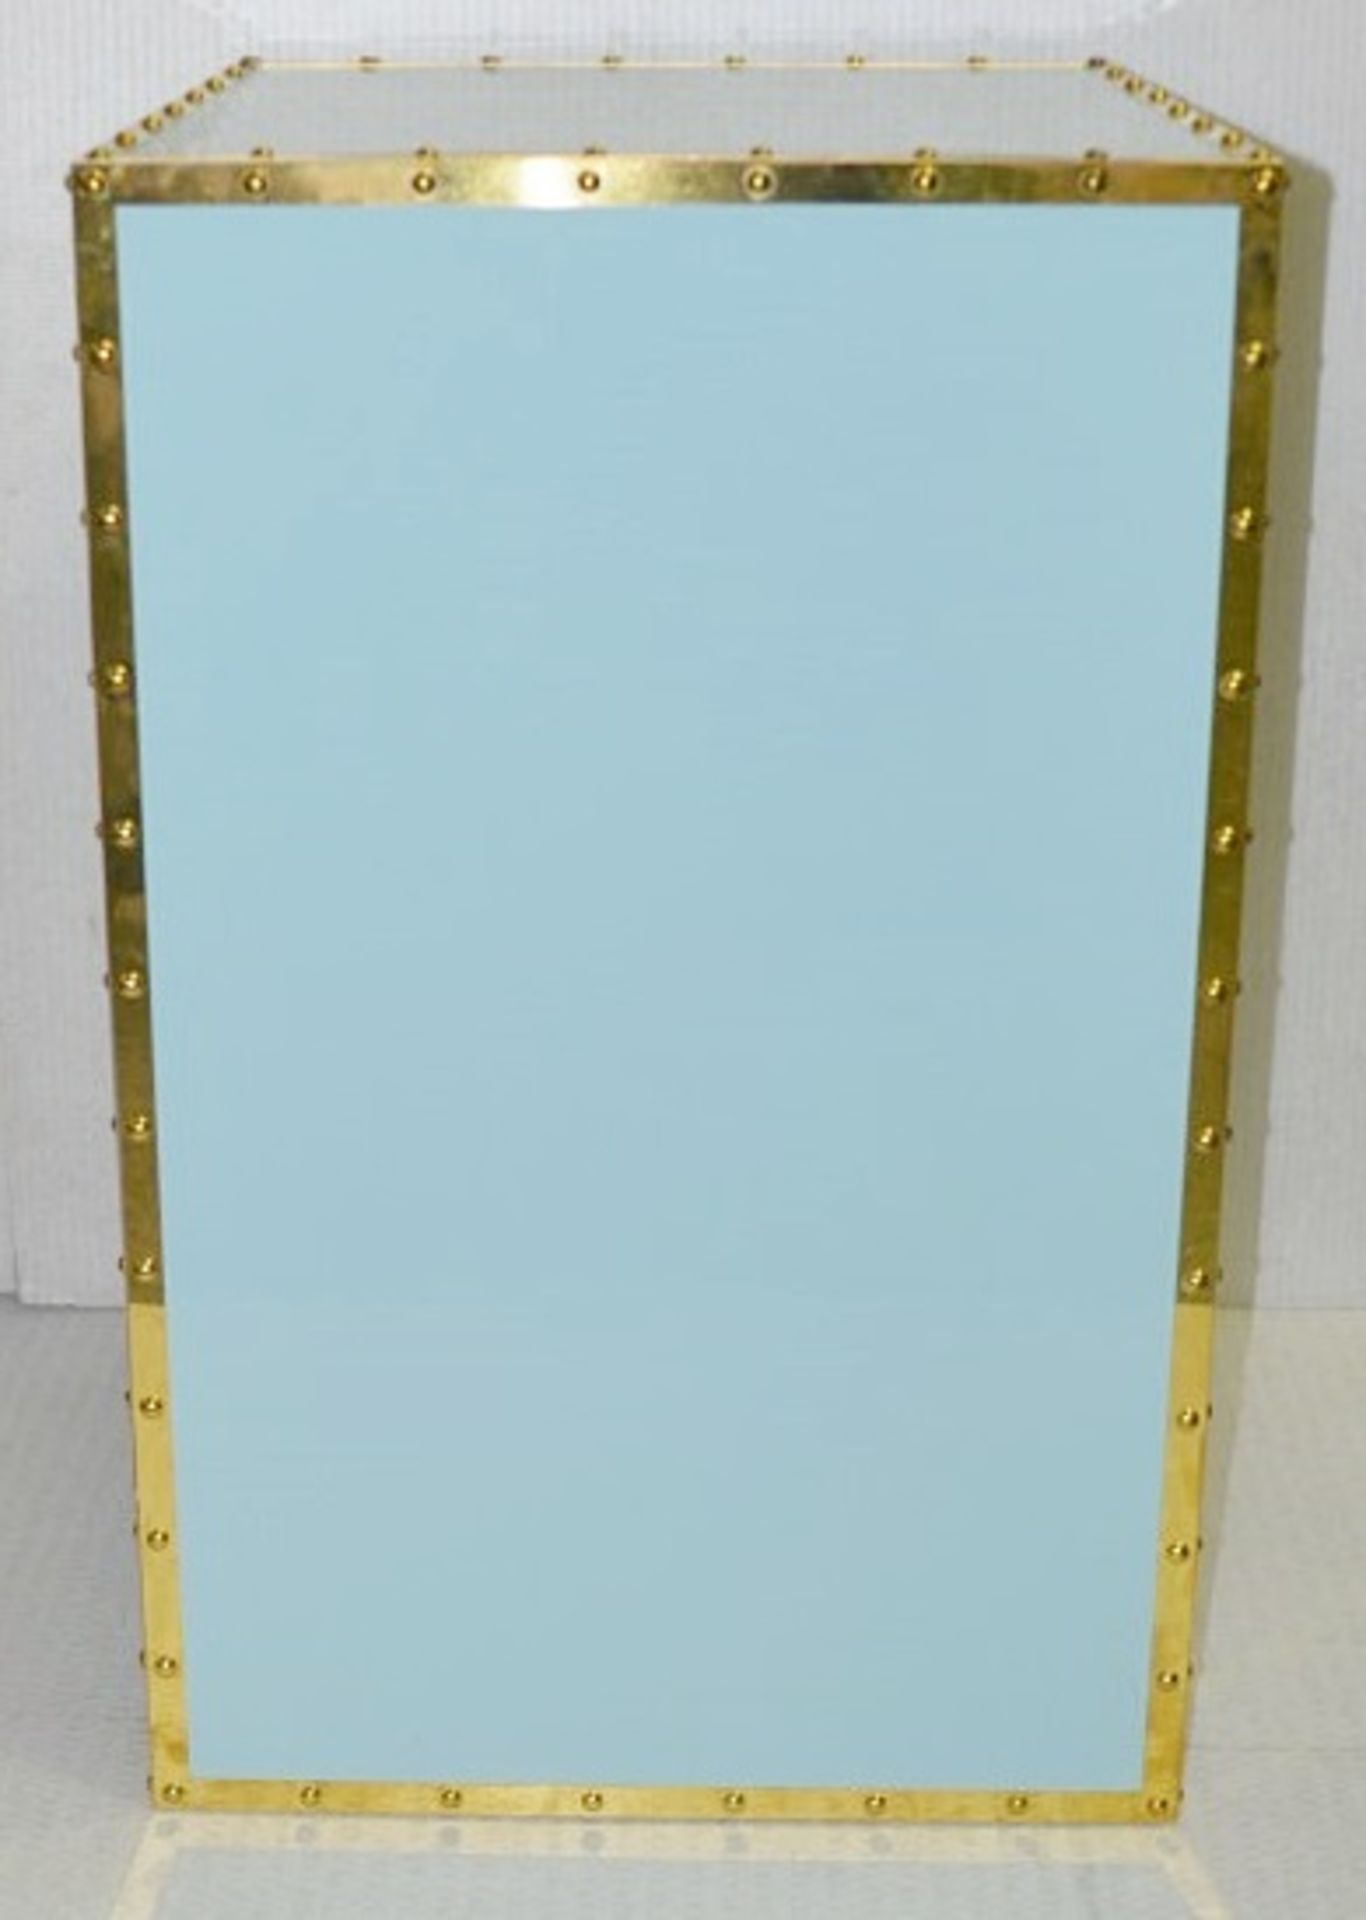 1 x Opulent Bank Vault Safe-style Shop Display Plinth In Tiffany Blue With Gold Trim - Image 5 of 6